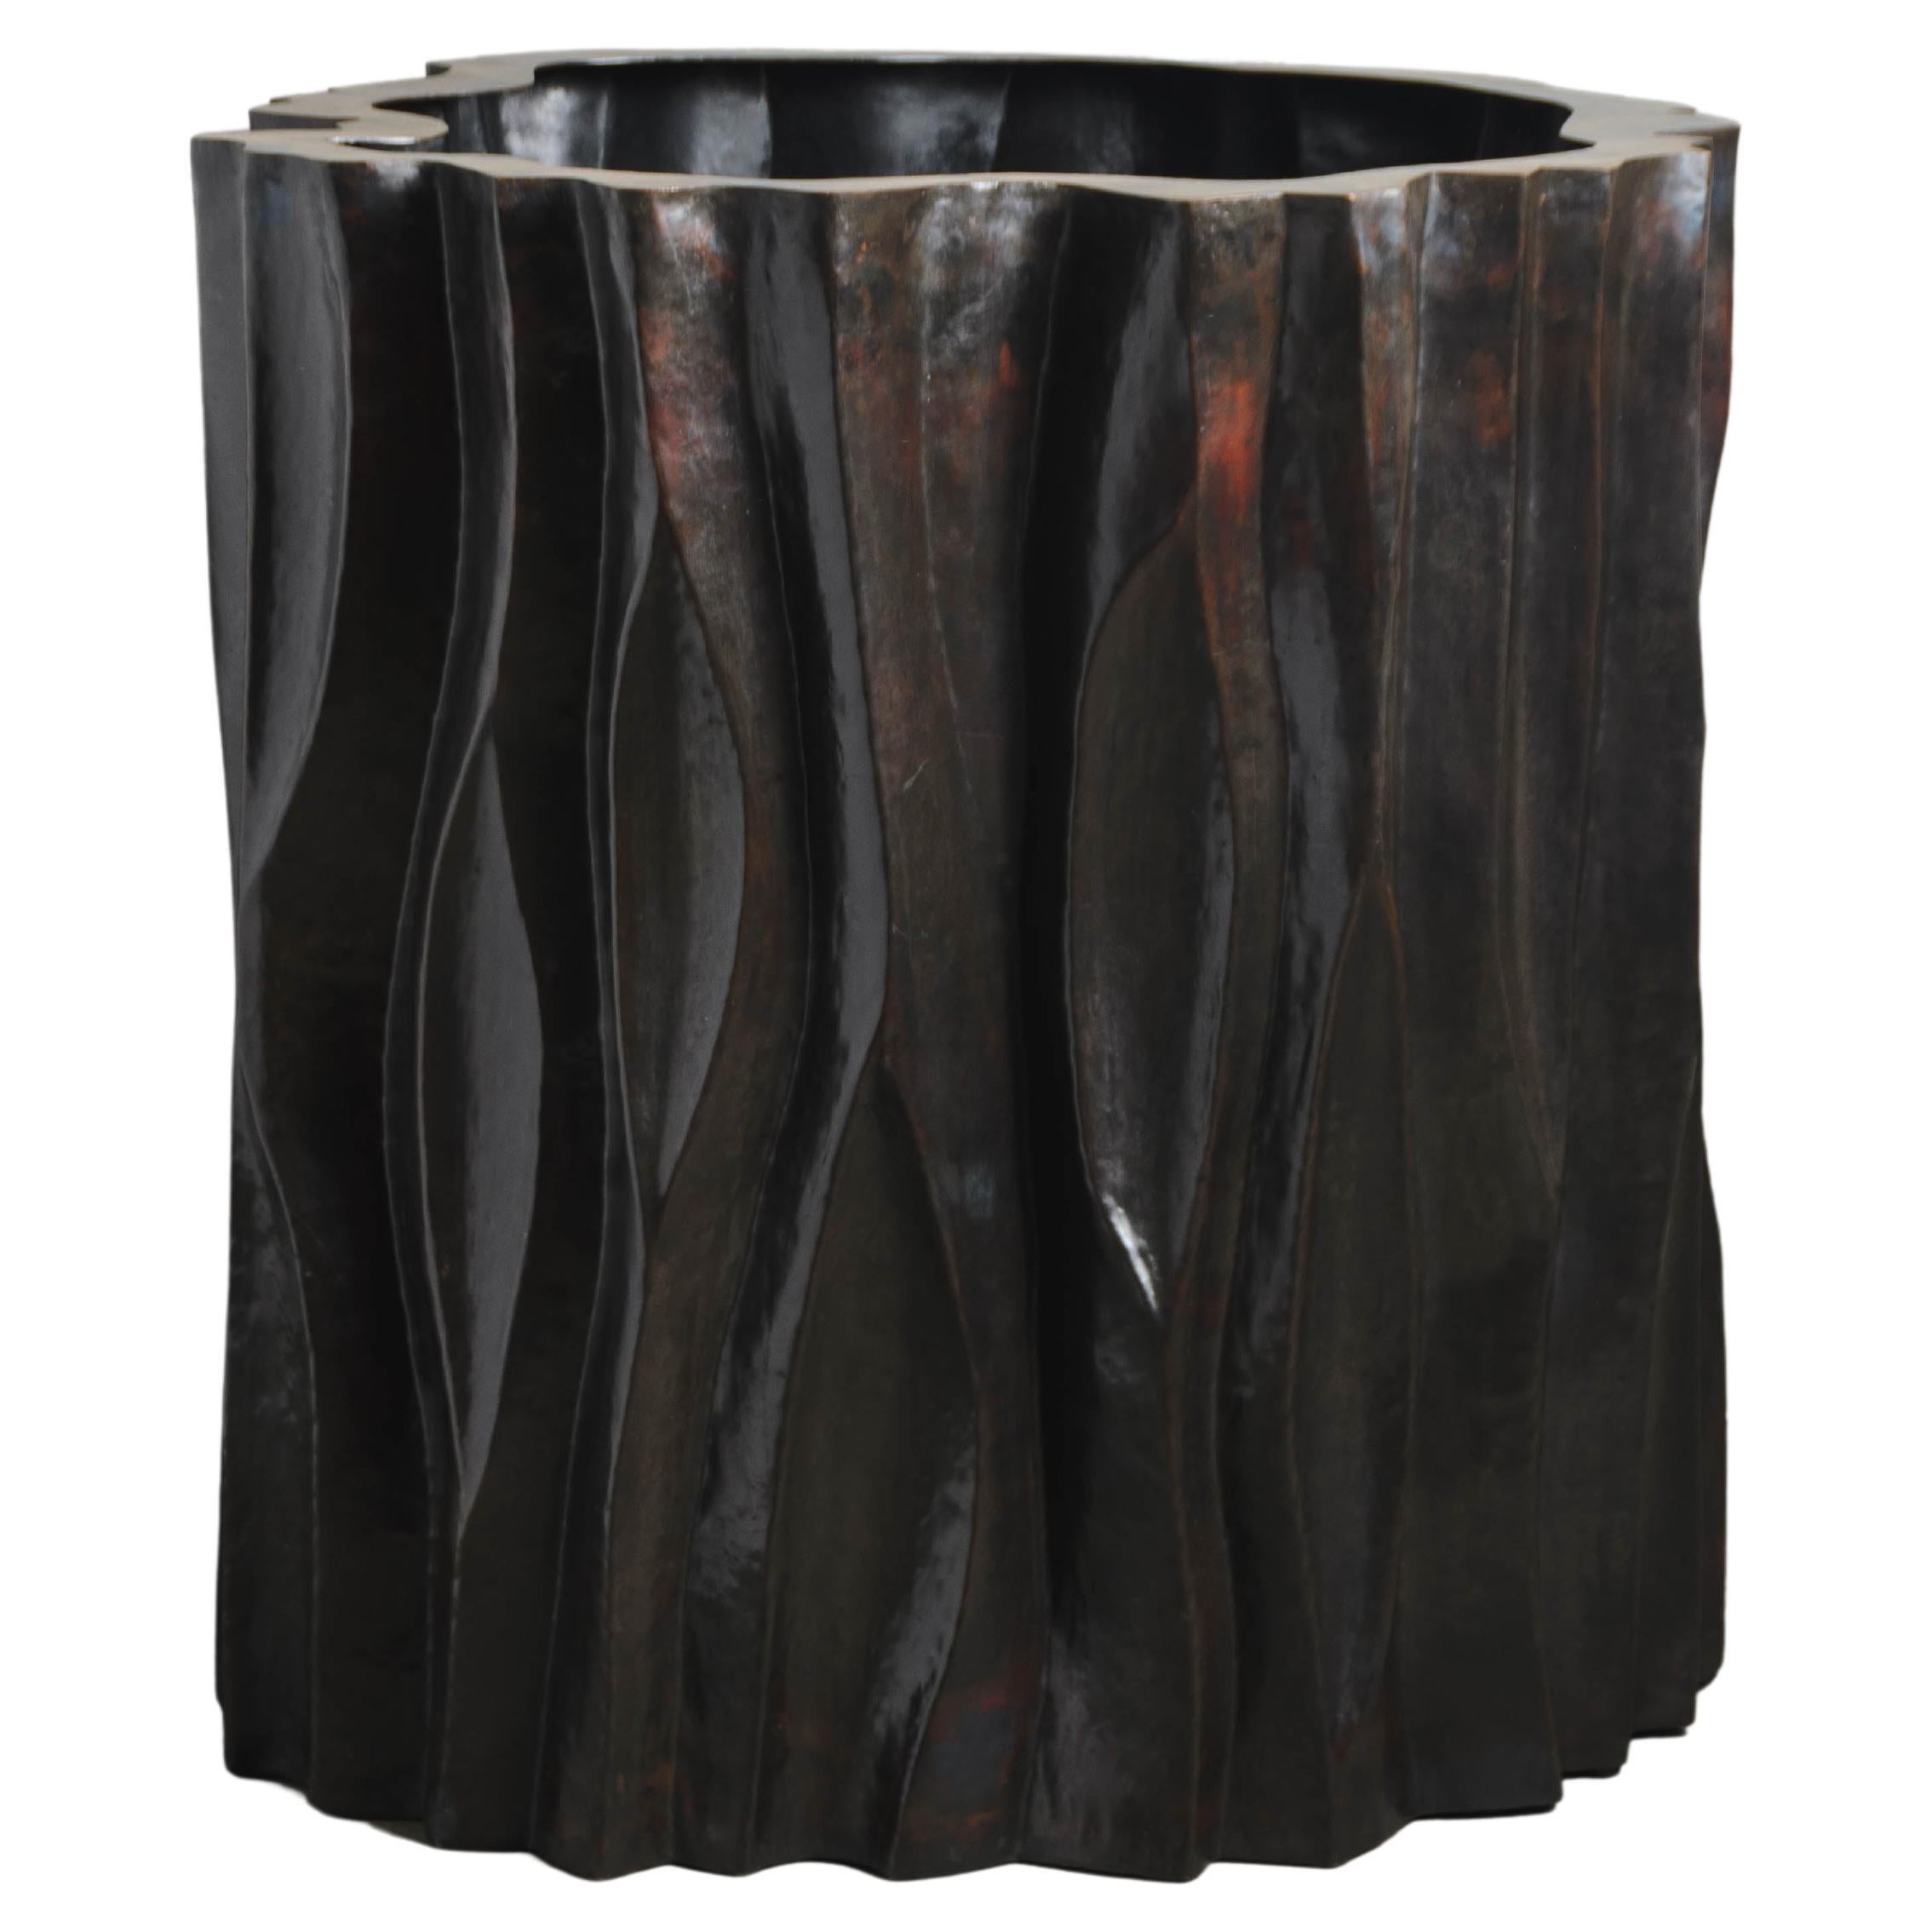 Contemporary Repoussé Large Tree Trunk Pot in Dark Antique Copper by Robert Kuo For Sale